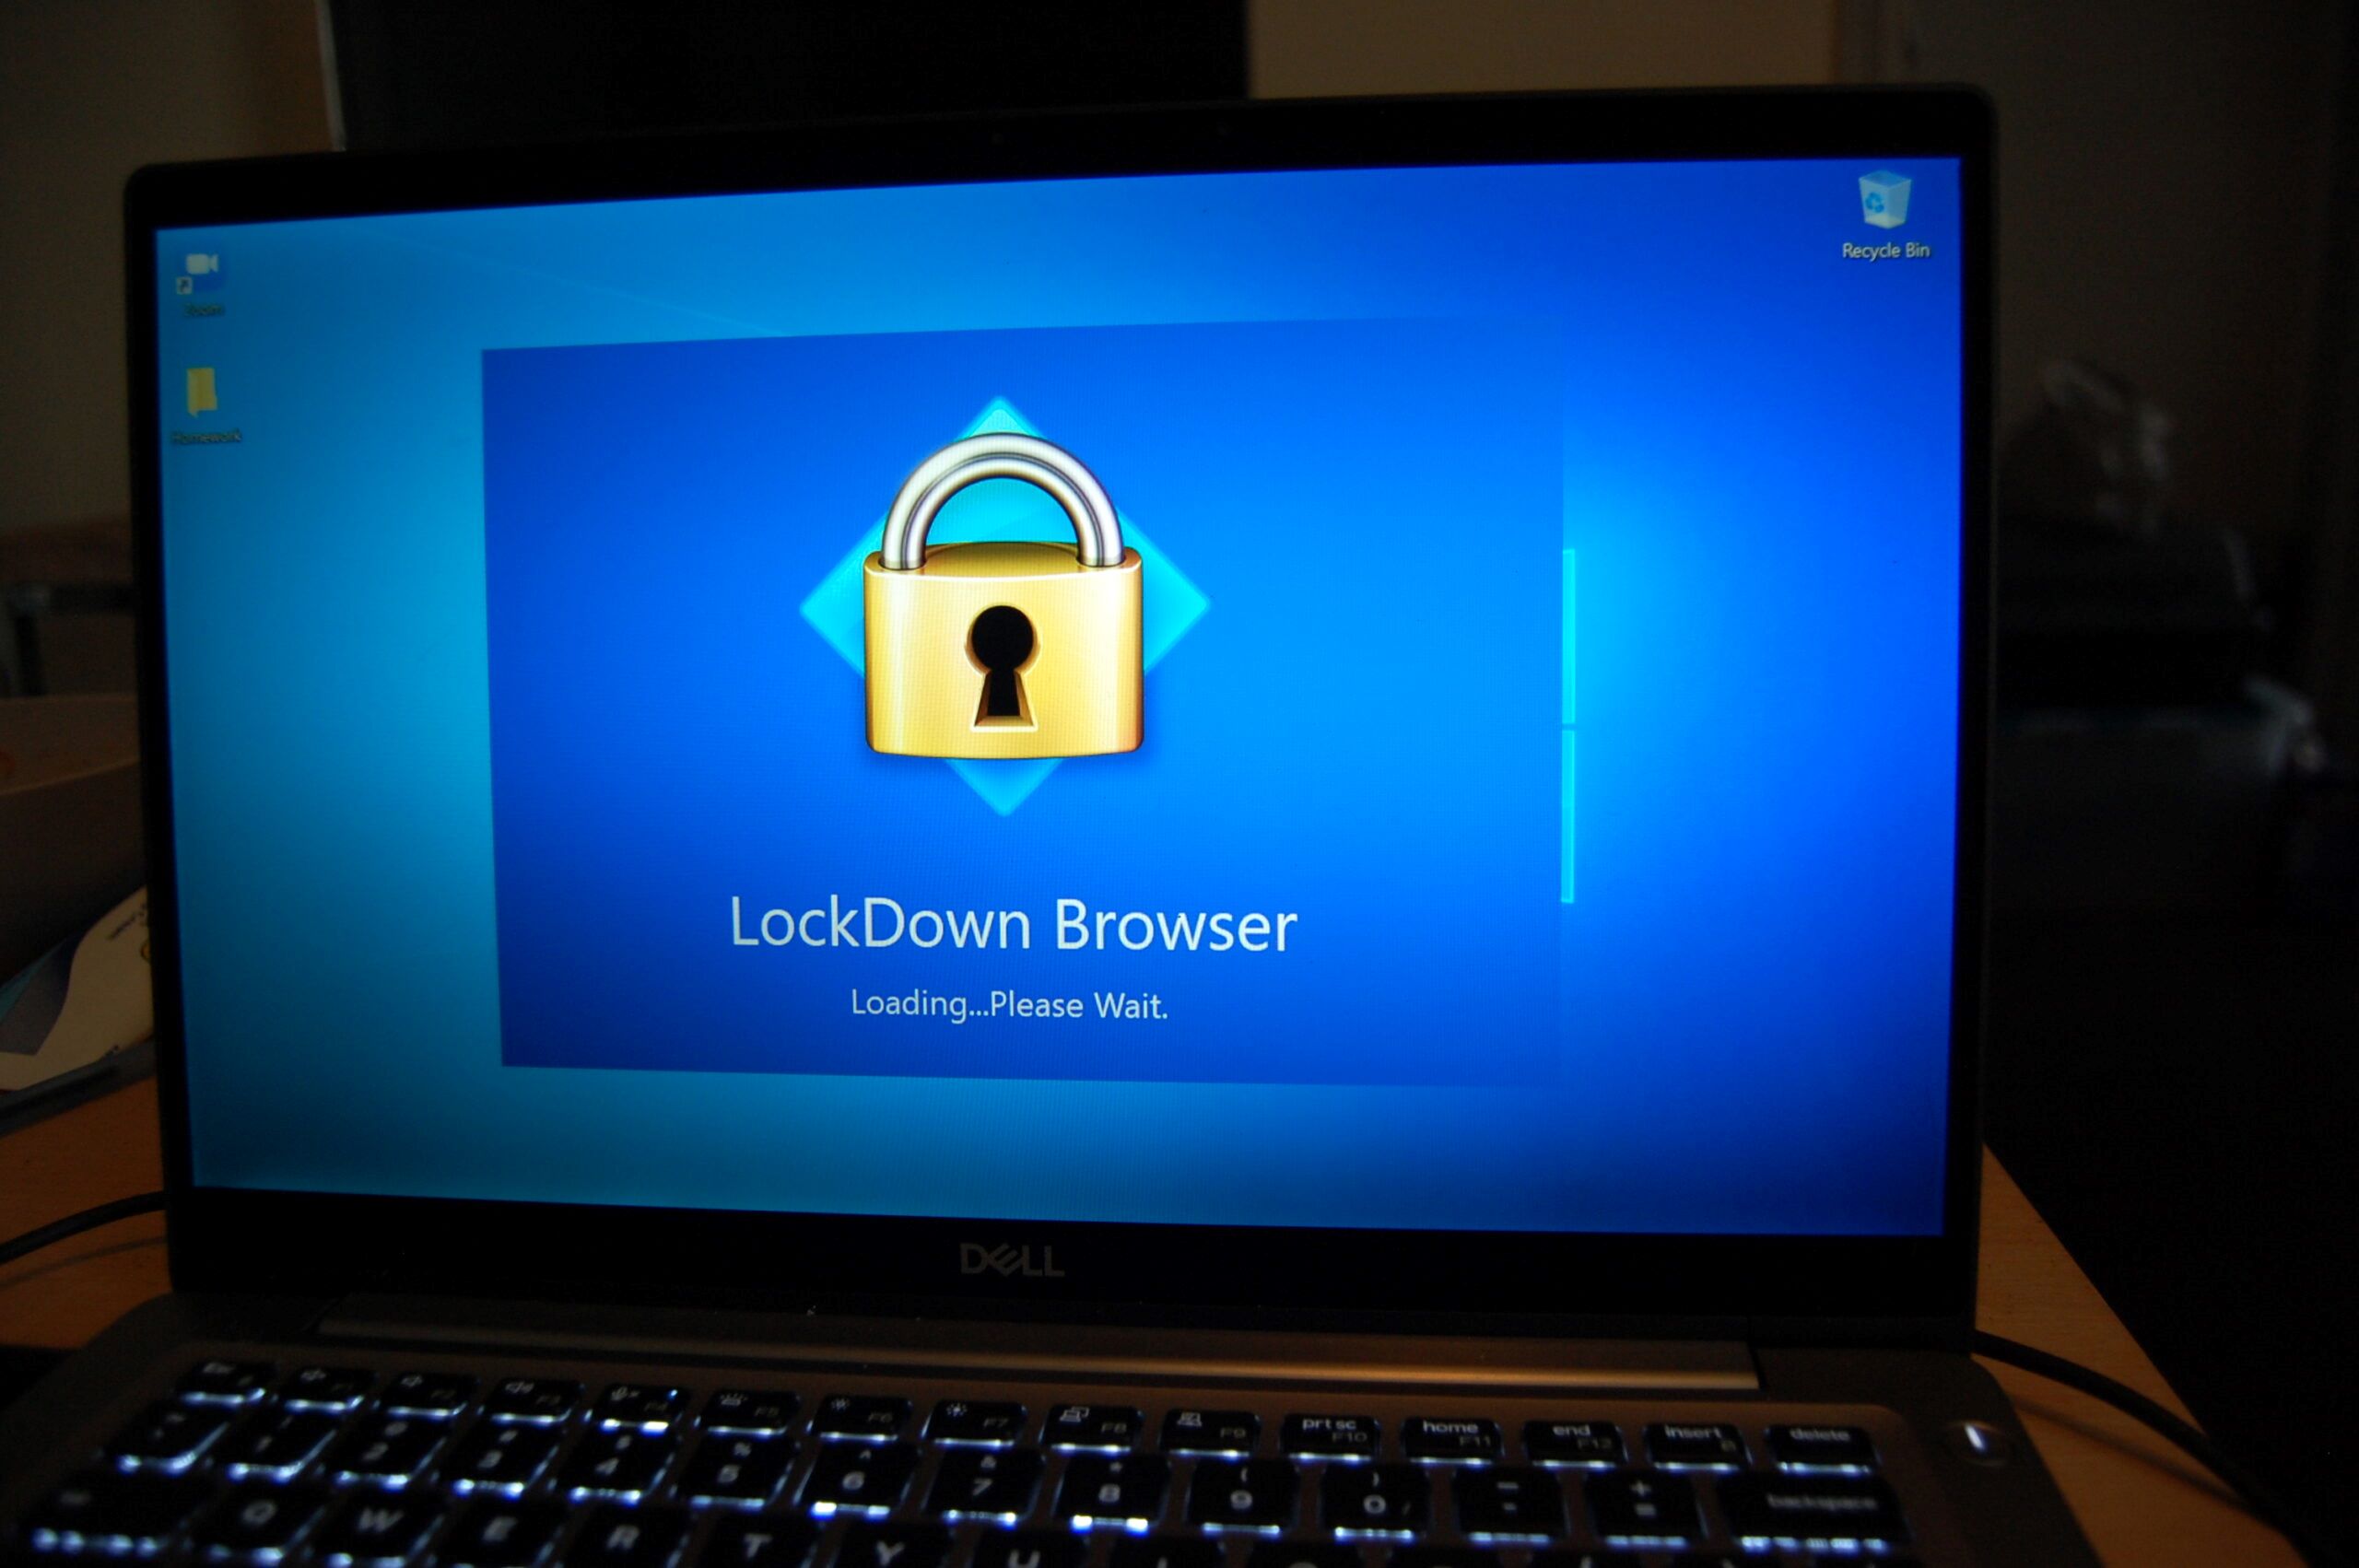 How Does Lockdown Browser Detect Cheating